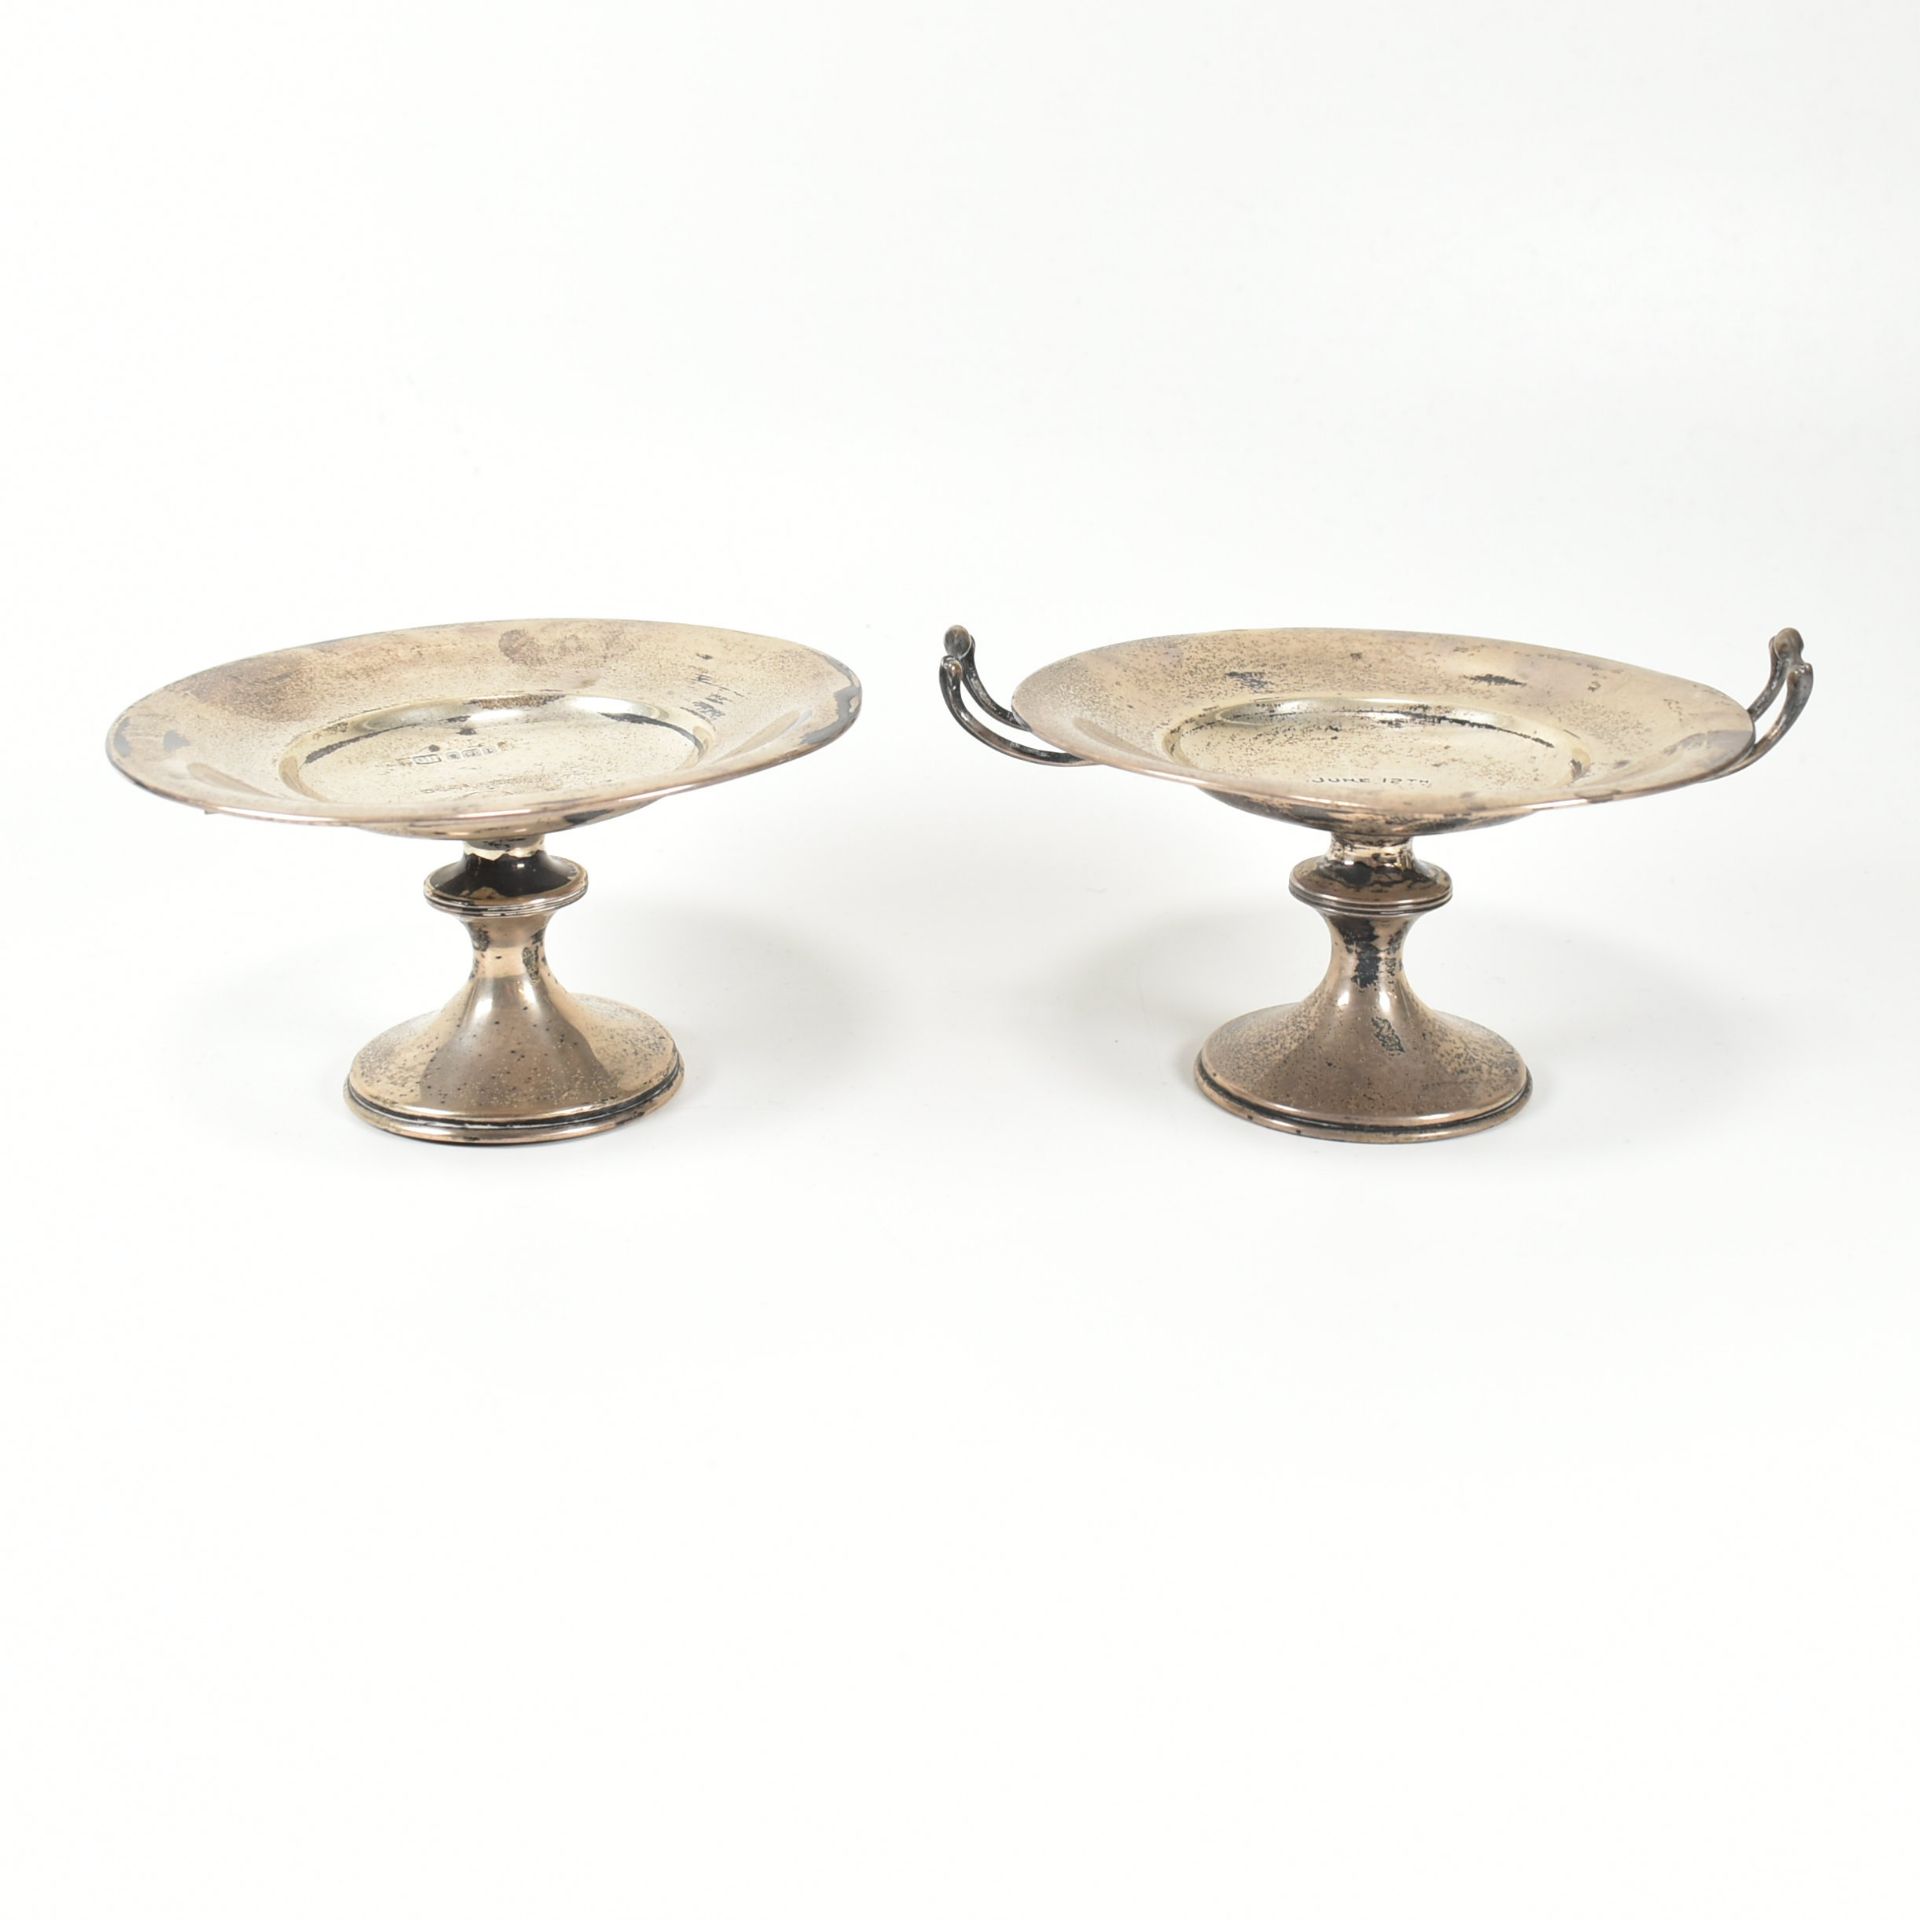 EDWARD VII HALLMARKED SILVER COMPOTE DISHES